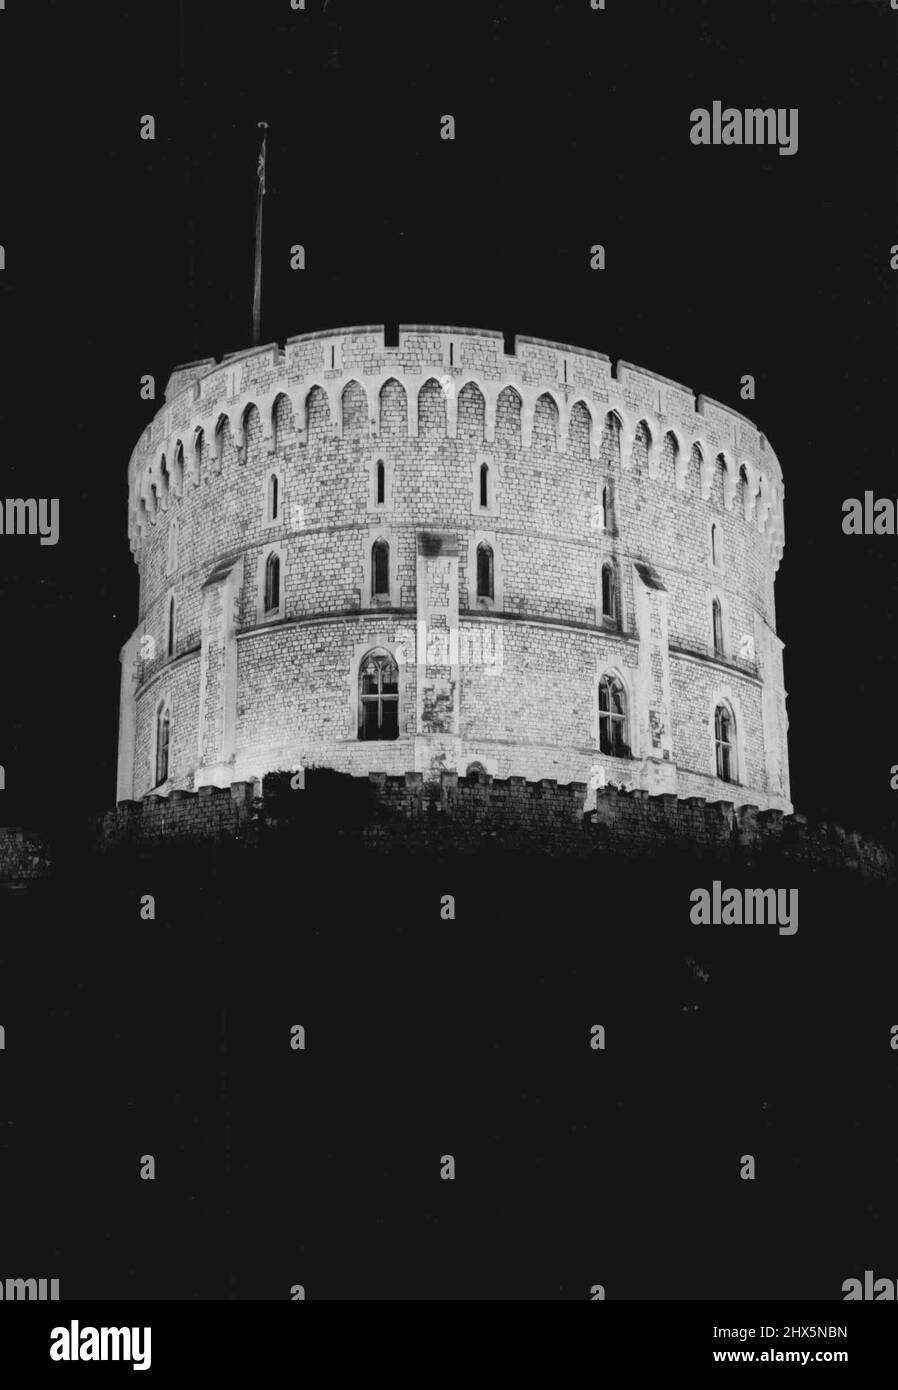 Windsor Castle Floodlit -- How the Round tower appears with the floodlighting of historic Windsor Castle. The lighting test was a try-out for the Festival. April 30, 1951. Stock Photo